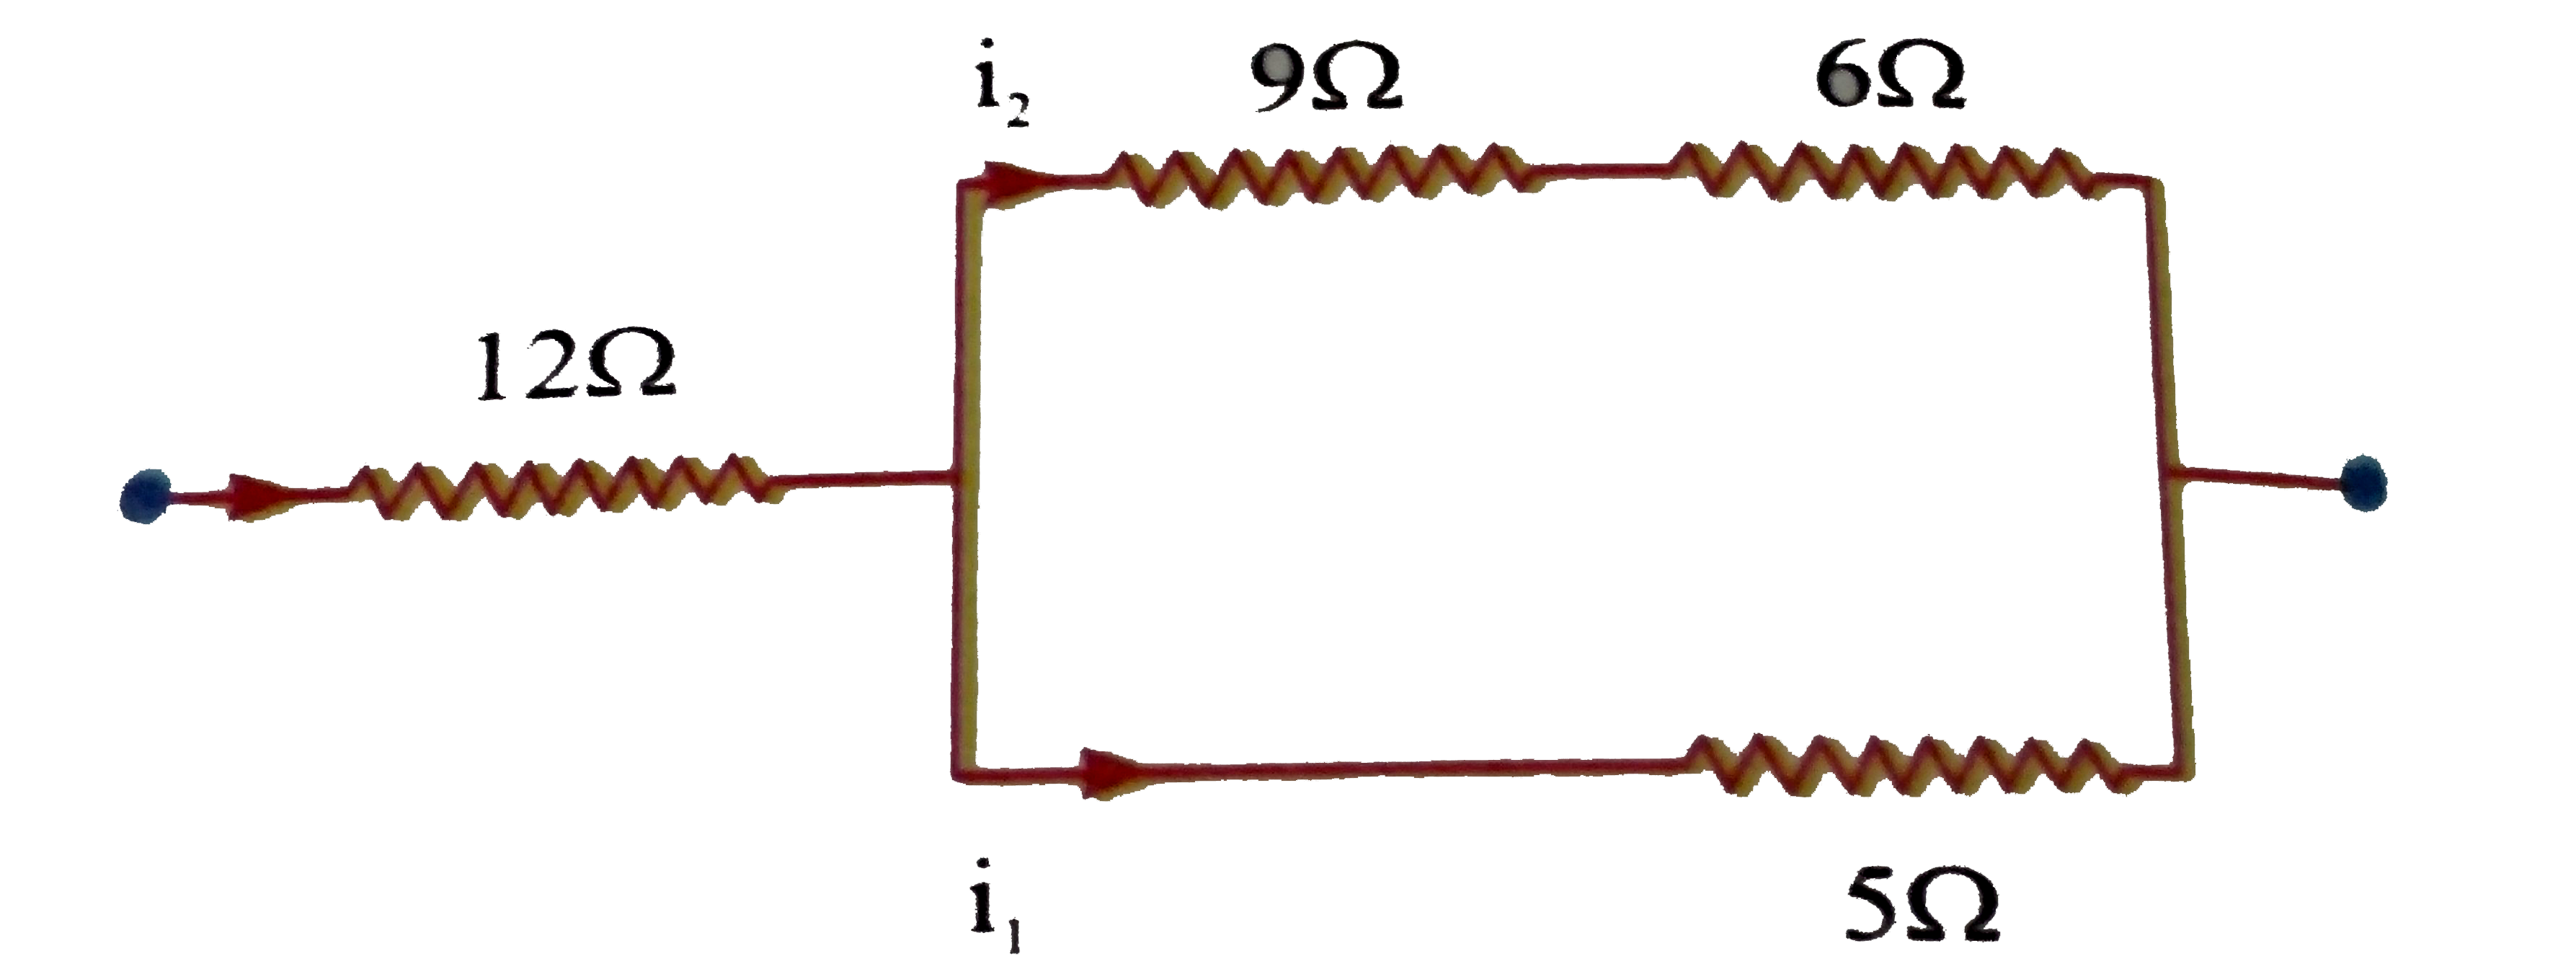 In the following circuit, 5Omega resistor develops 45 J/s due to current flowing through it. The power developed across 12Omega resistor is  A. 16 W B. 192W C. 36W  D. 64W